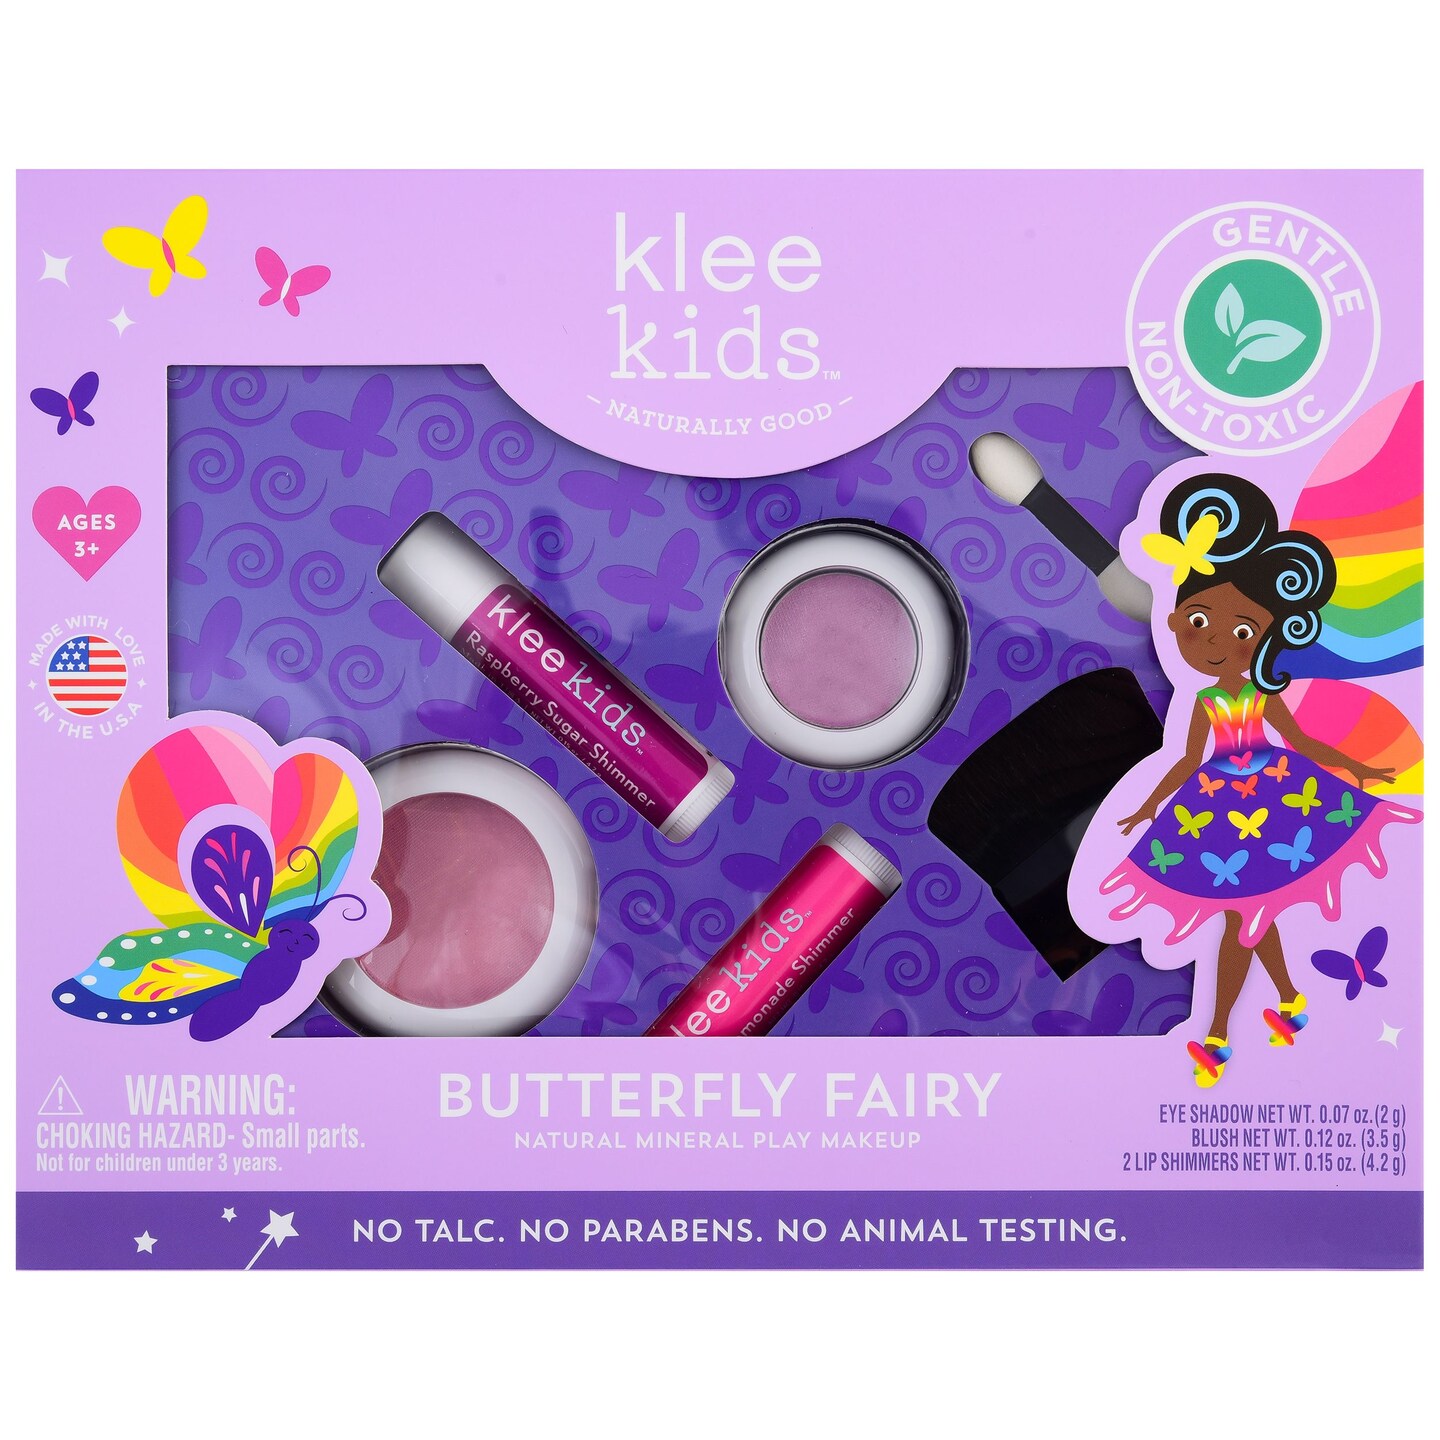 Klee Naturals Butterfly Fairy 4-PC Natural Play Makeup Kit